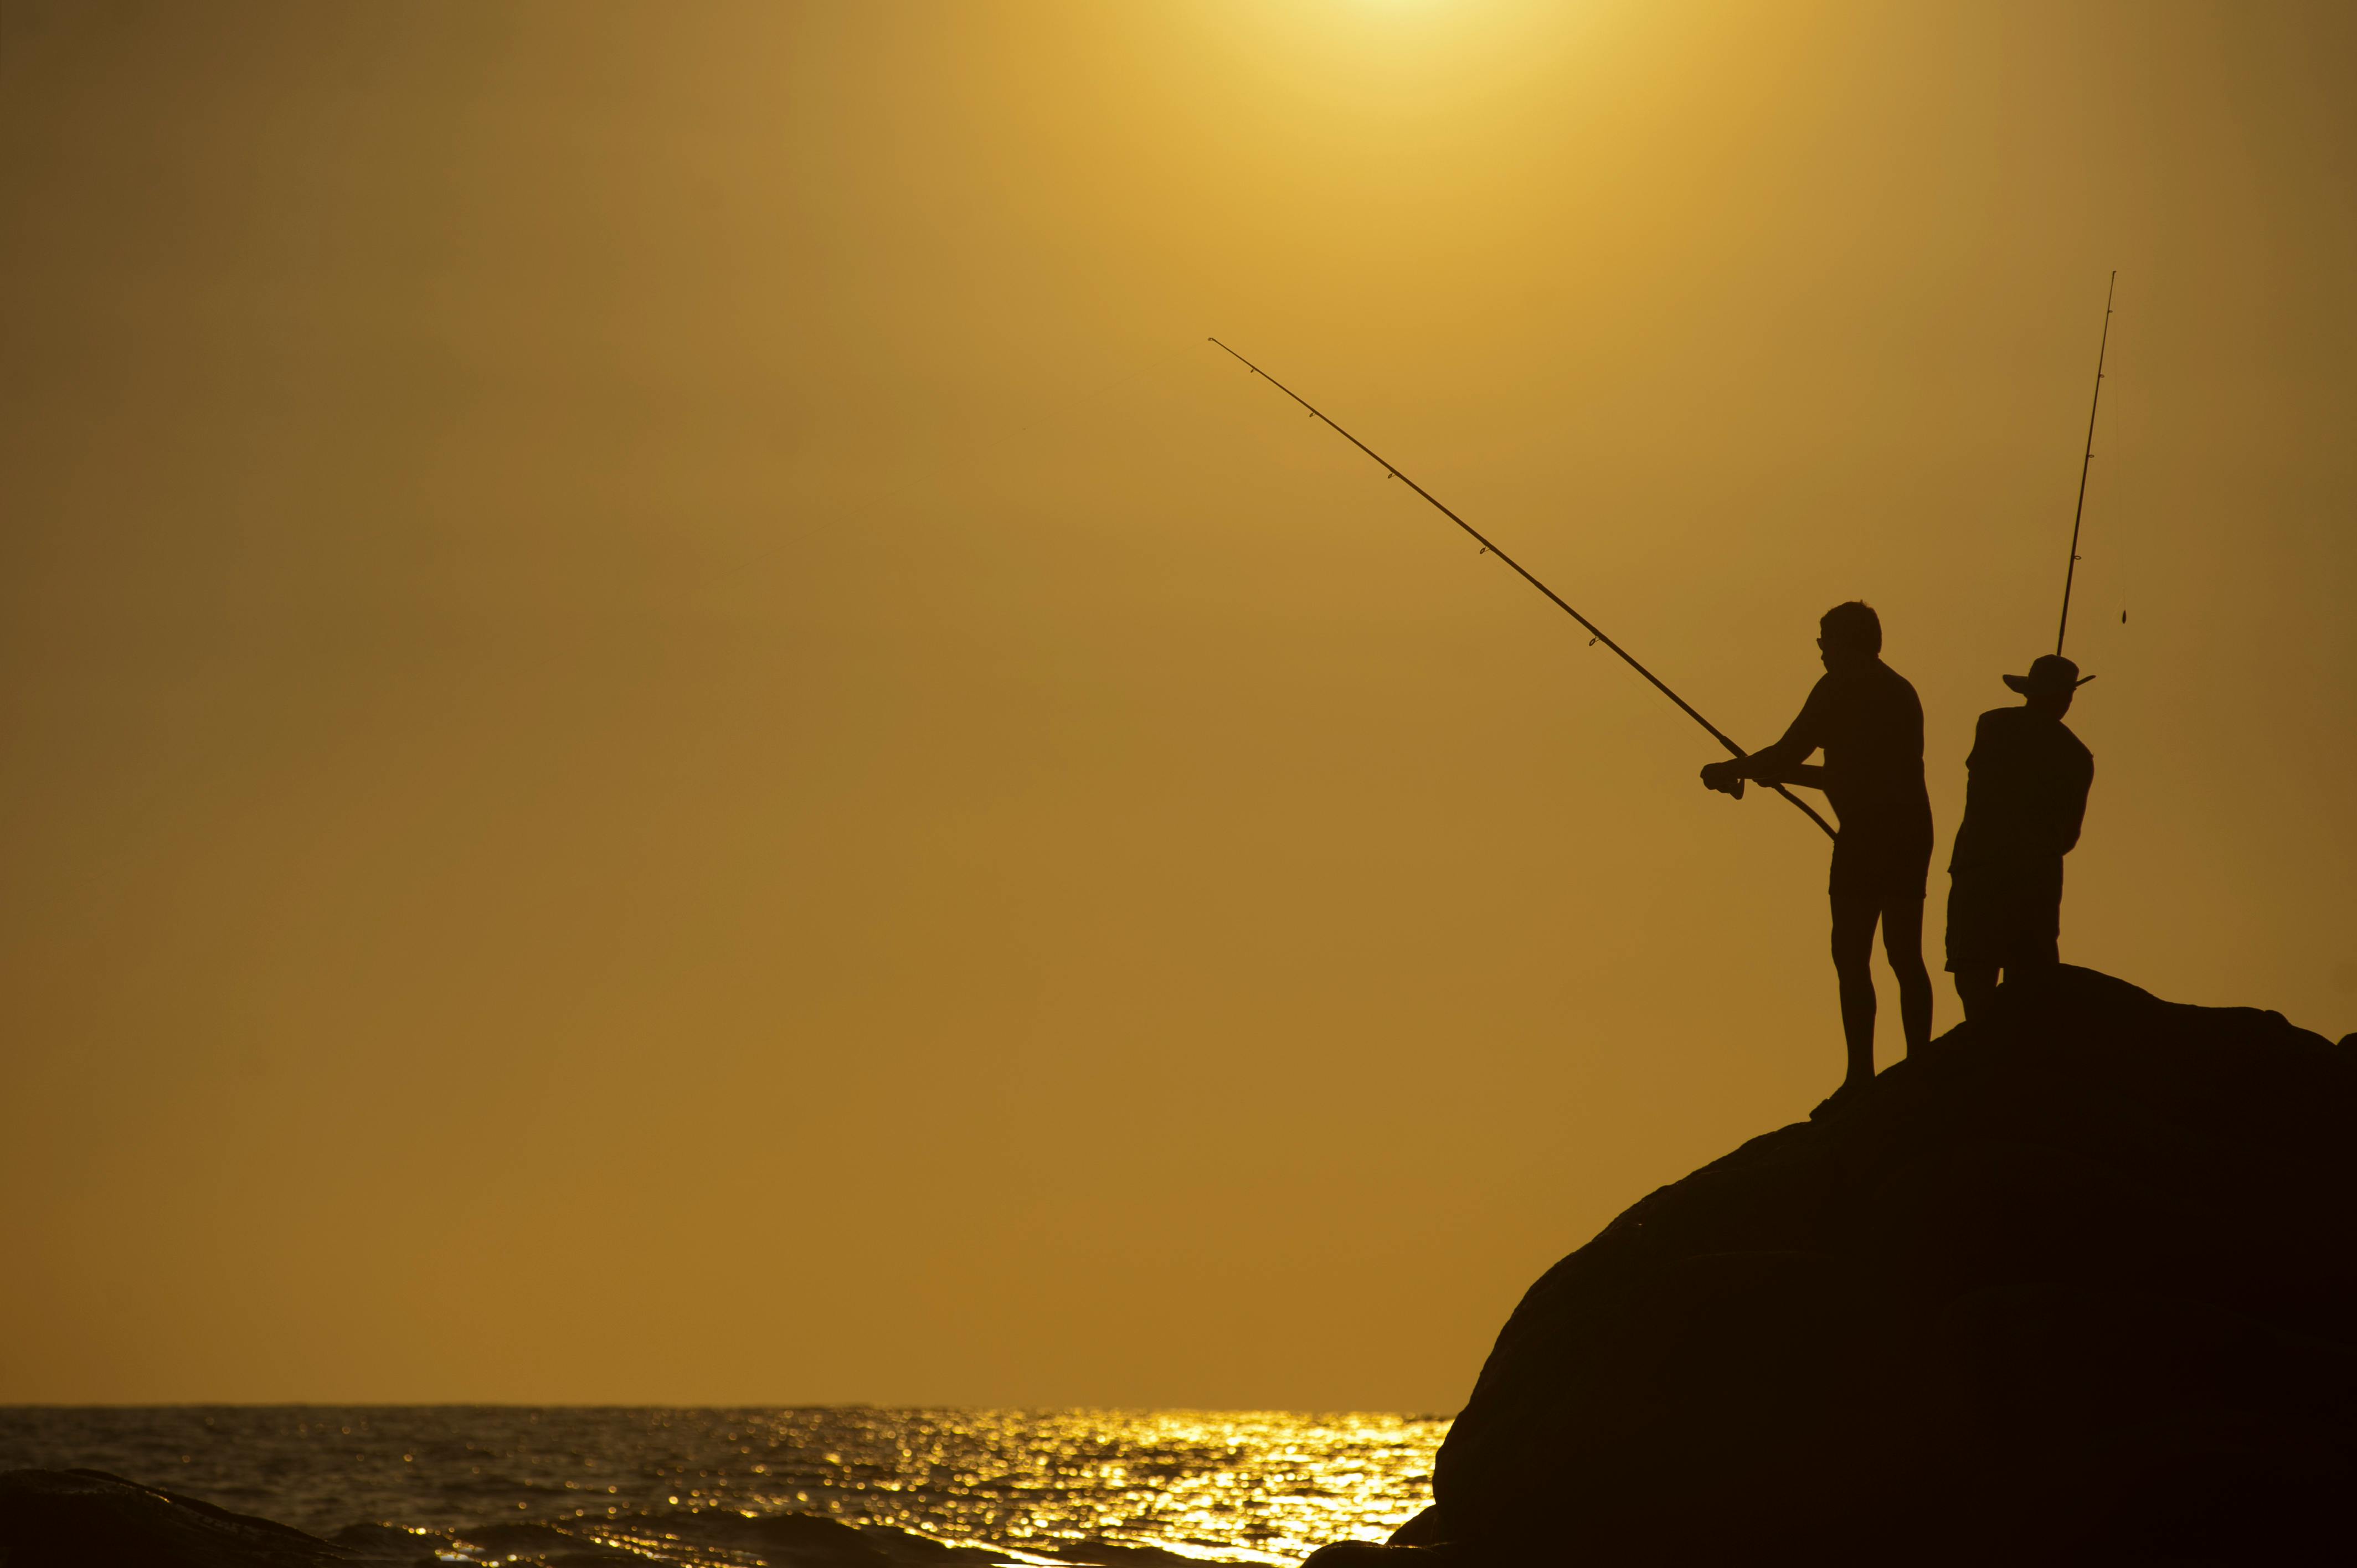 Silhouette Photo of Two Men Holding Fishing Rods Against Body of